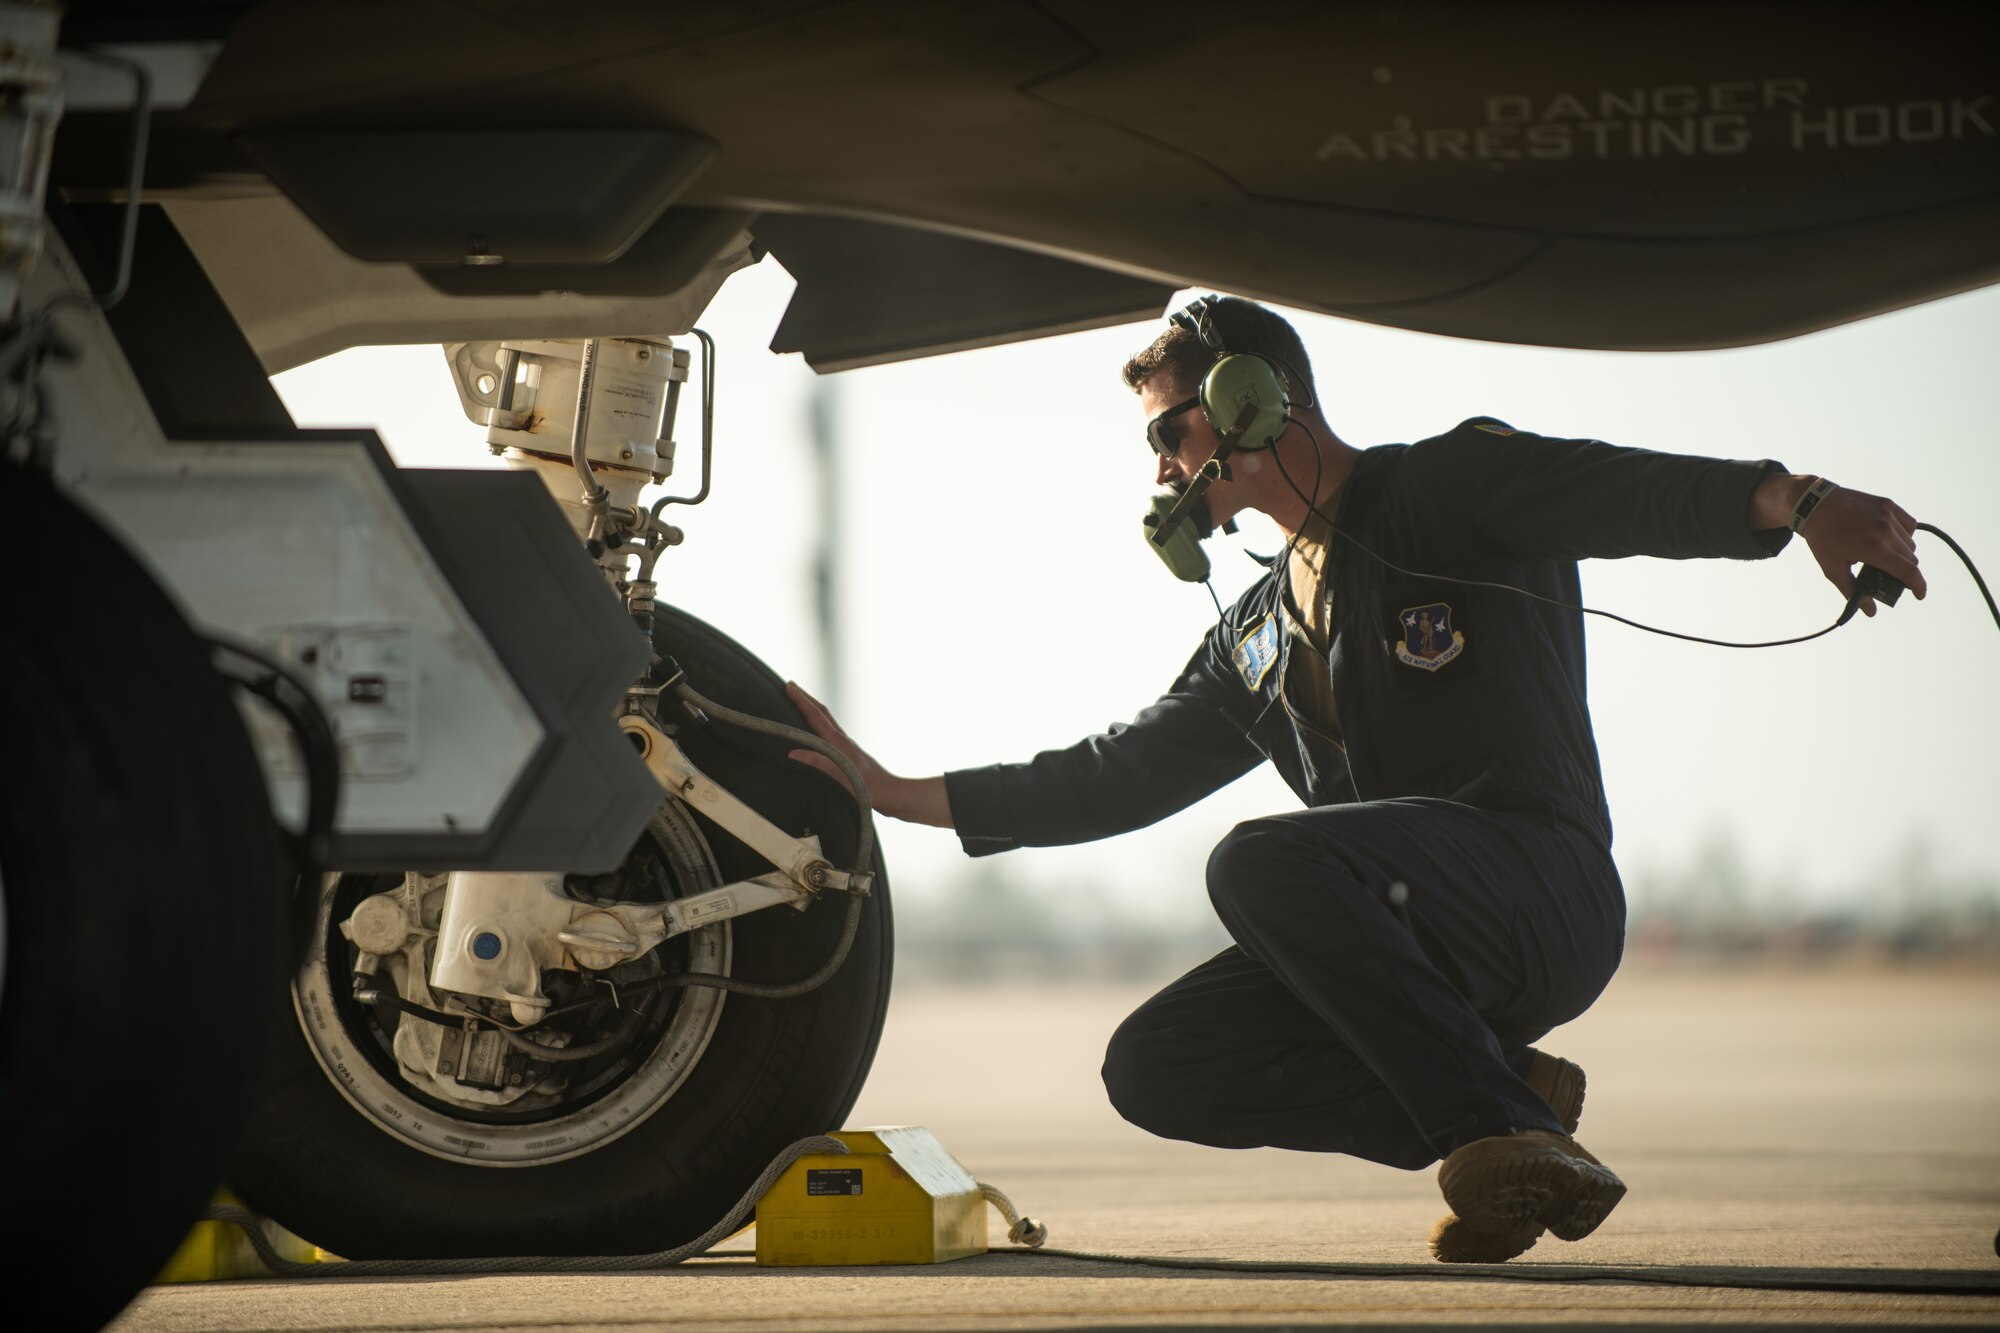 Staff Sgt. Joe Payea, a crew chief assigned to the 158th Maintenance Group, Vermont Air National Guard, prepares to launch an F-35A Lightning II during a training exercise